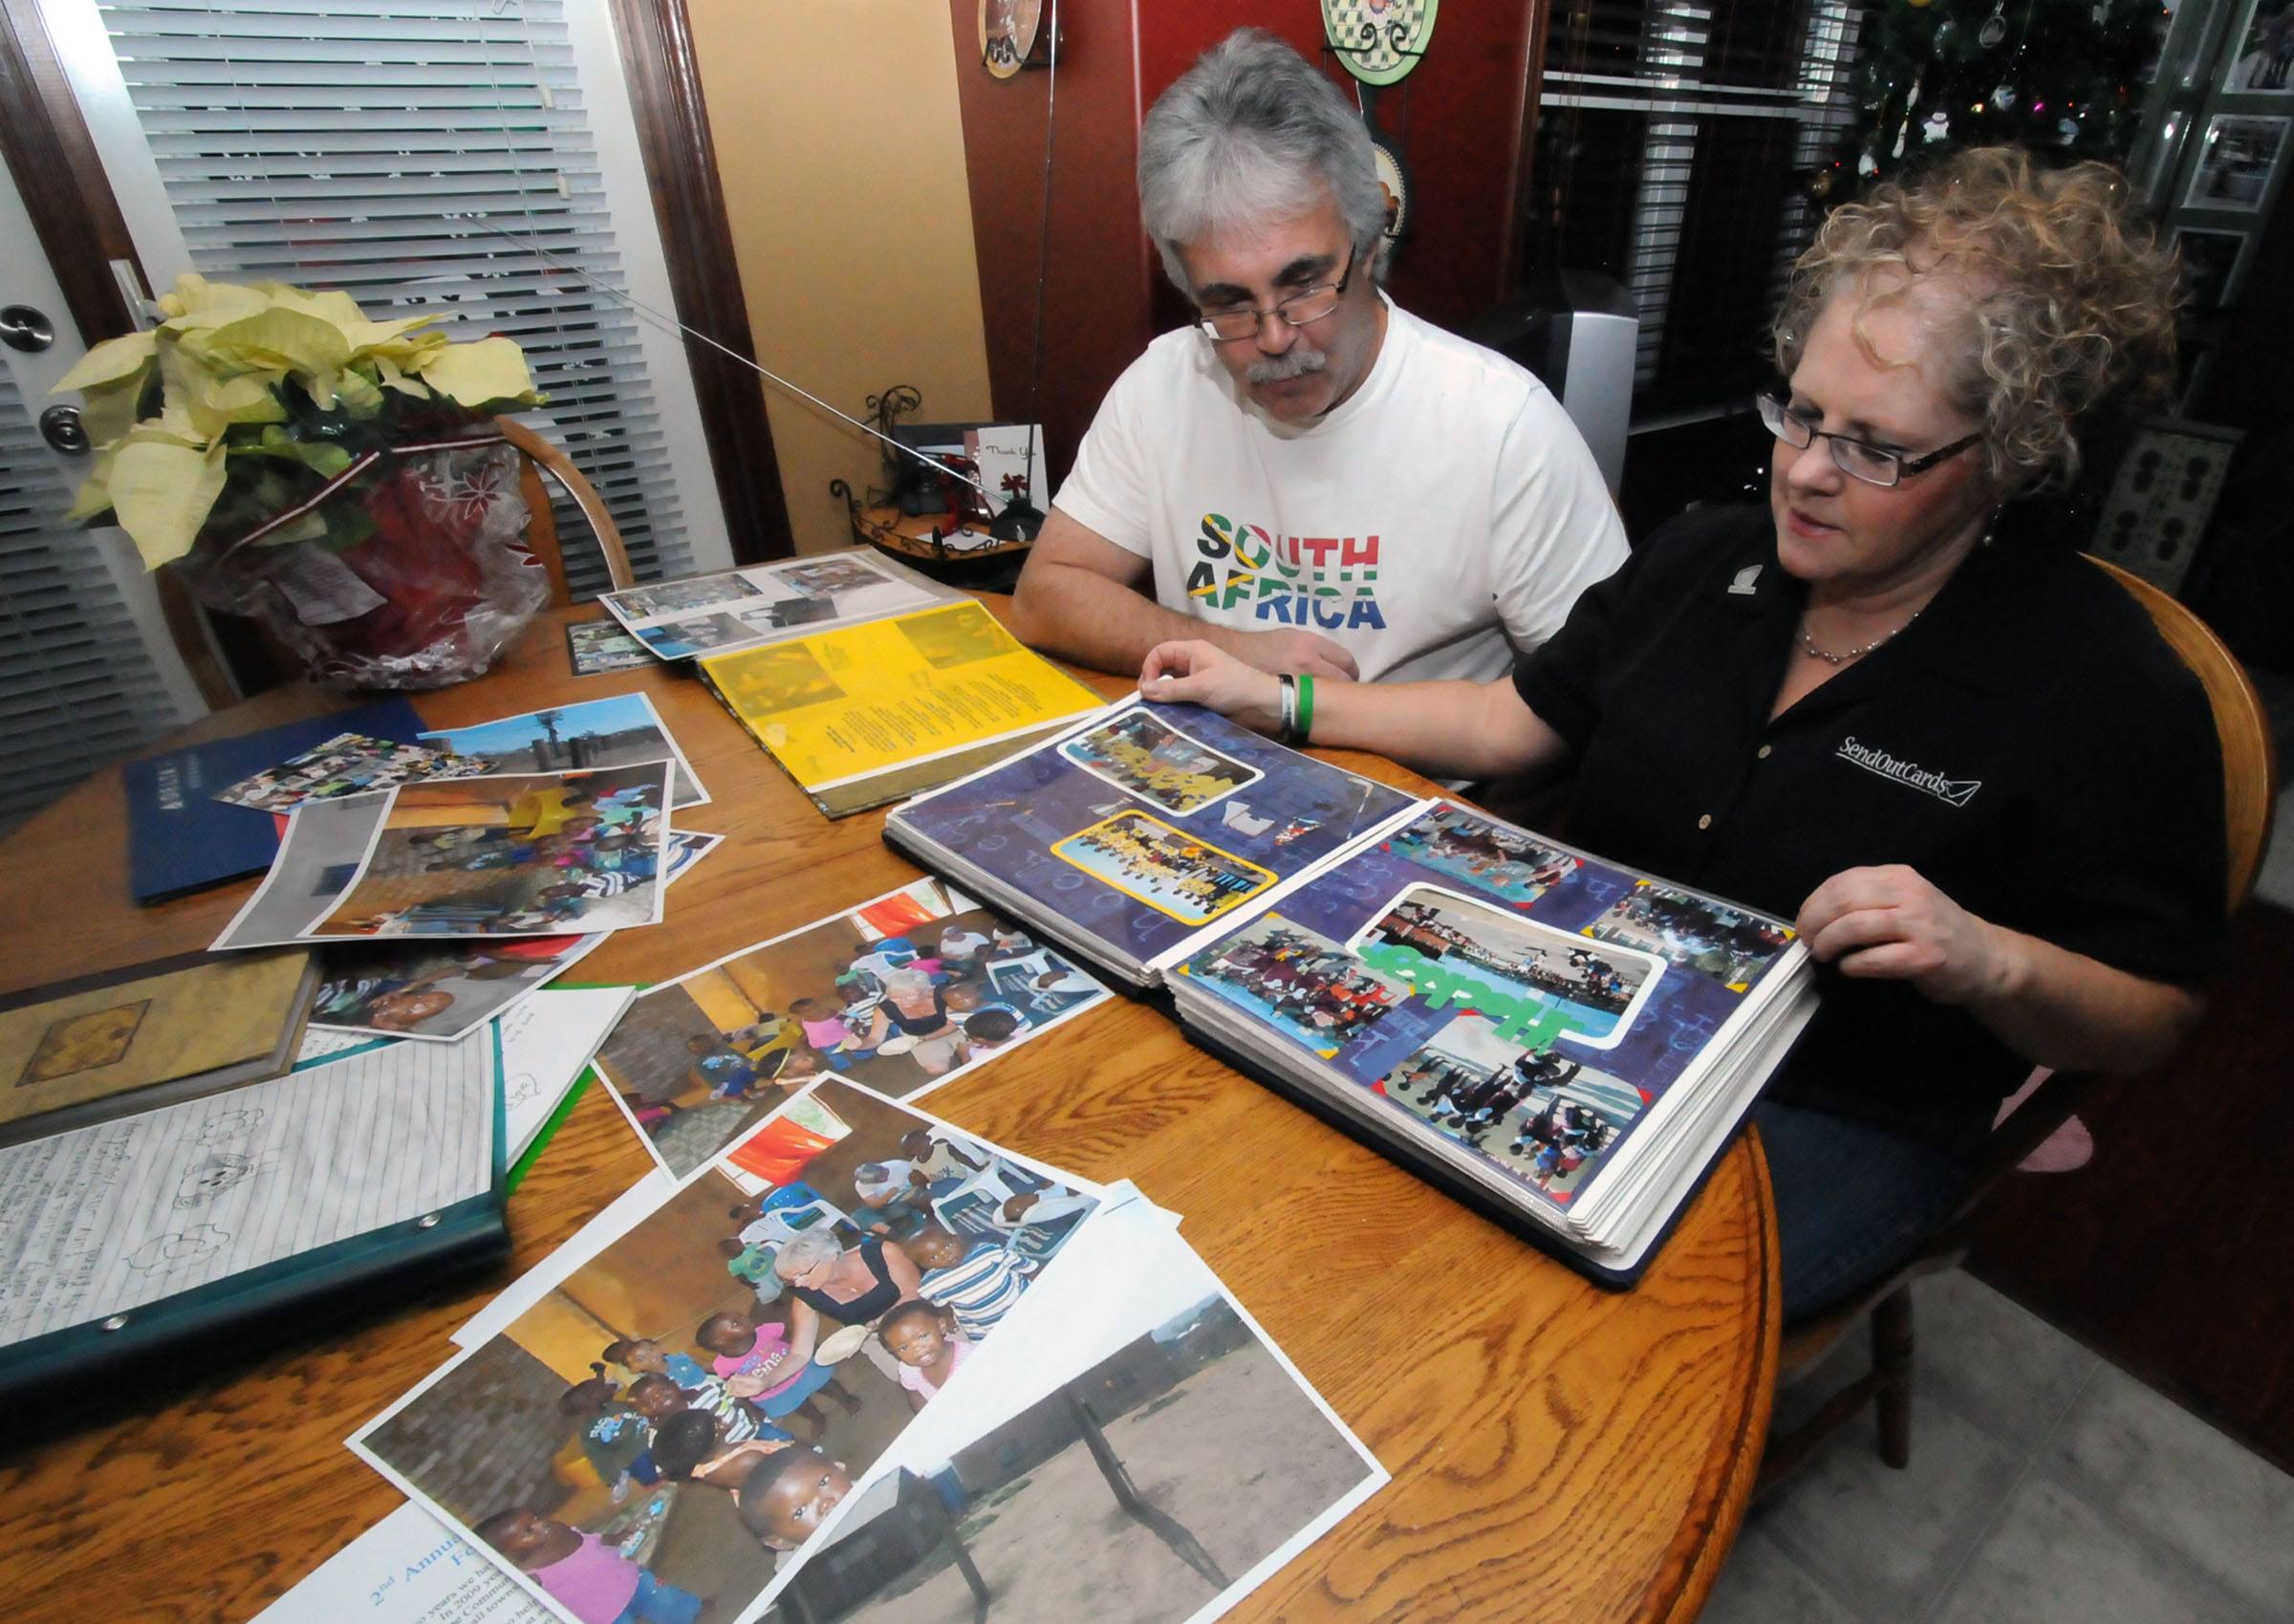 HELPING AFRICA- Scott and Jo-Ann Grimwood look over a scrapbook they made from his travels to Africa. They’ve helped raise money for schools and other needed facilities through the Seed of Hope organization.